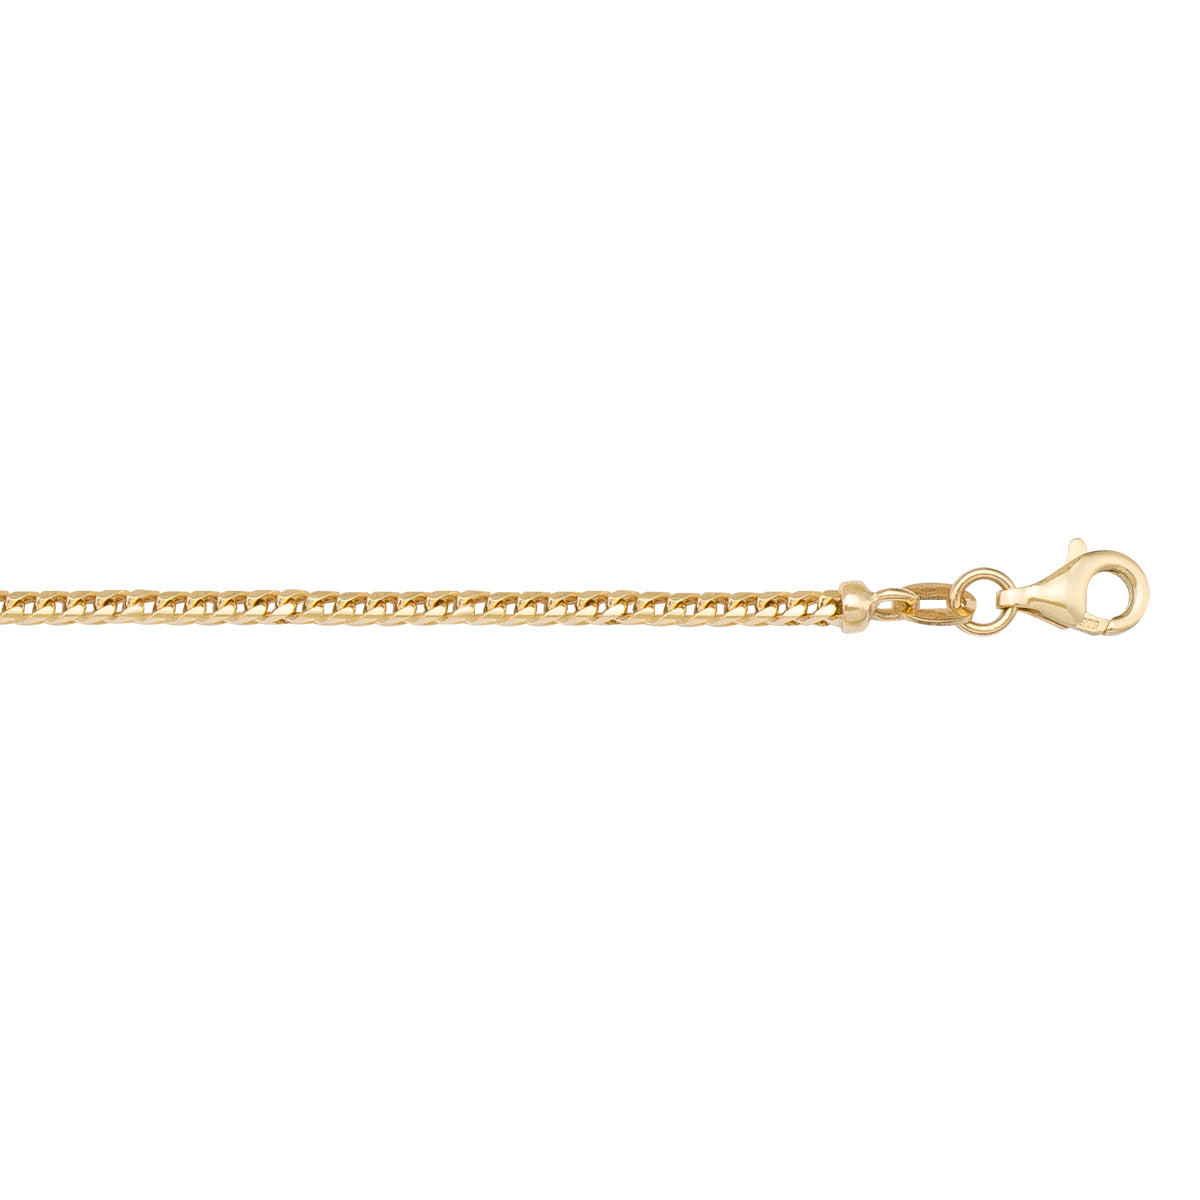 CHAINS YELLOW GOLD SOLID FRANCO LINK 